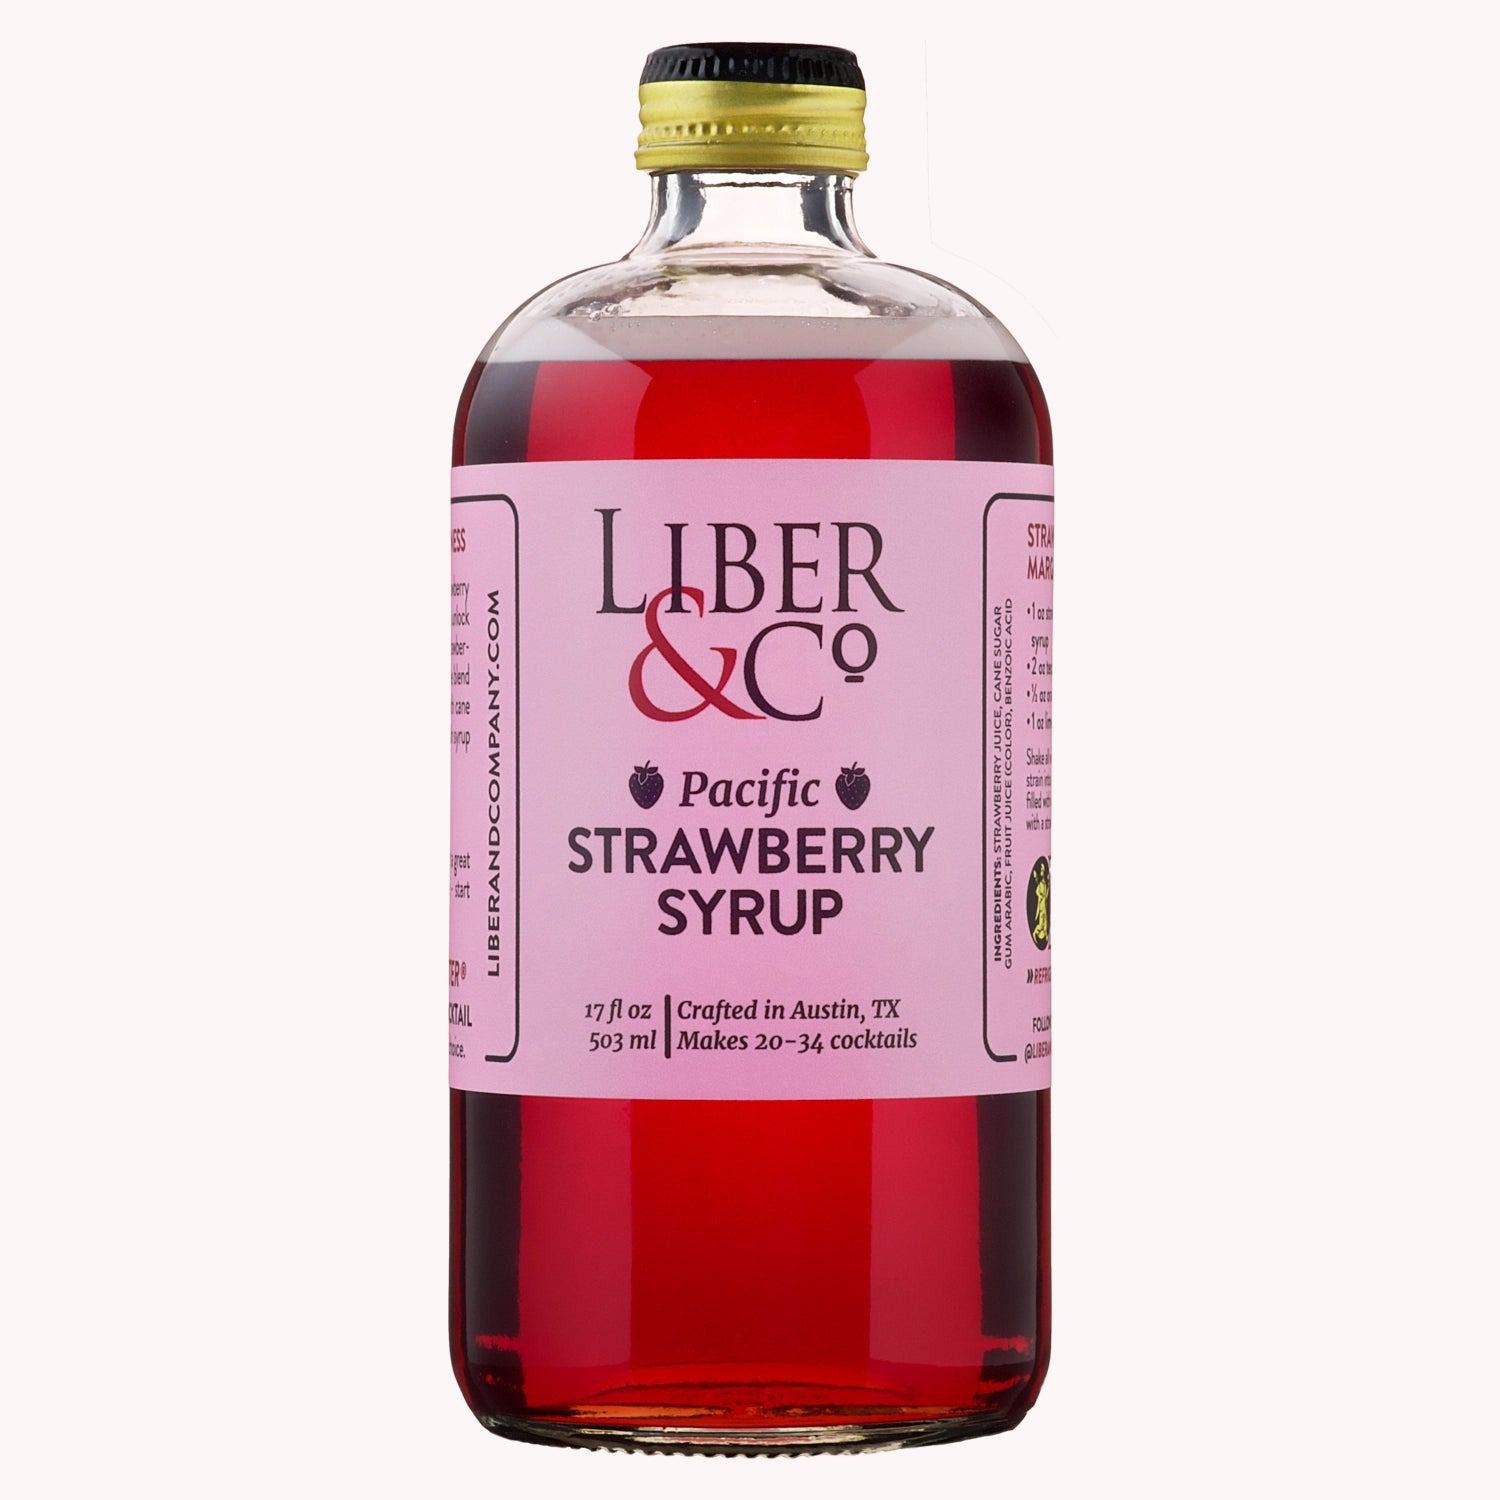 New Release: Pacific Strawberry Syrup